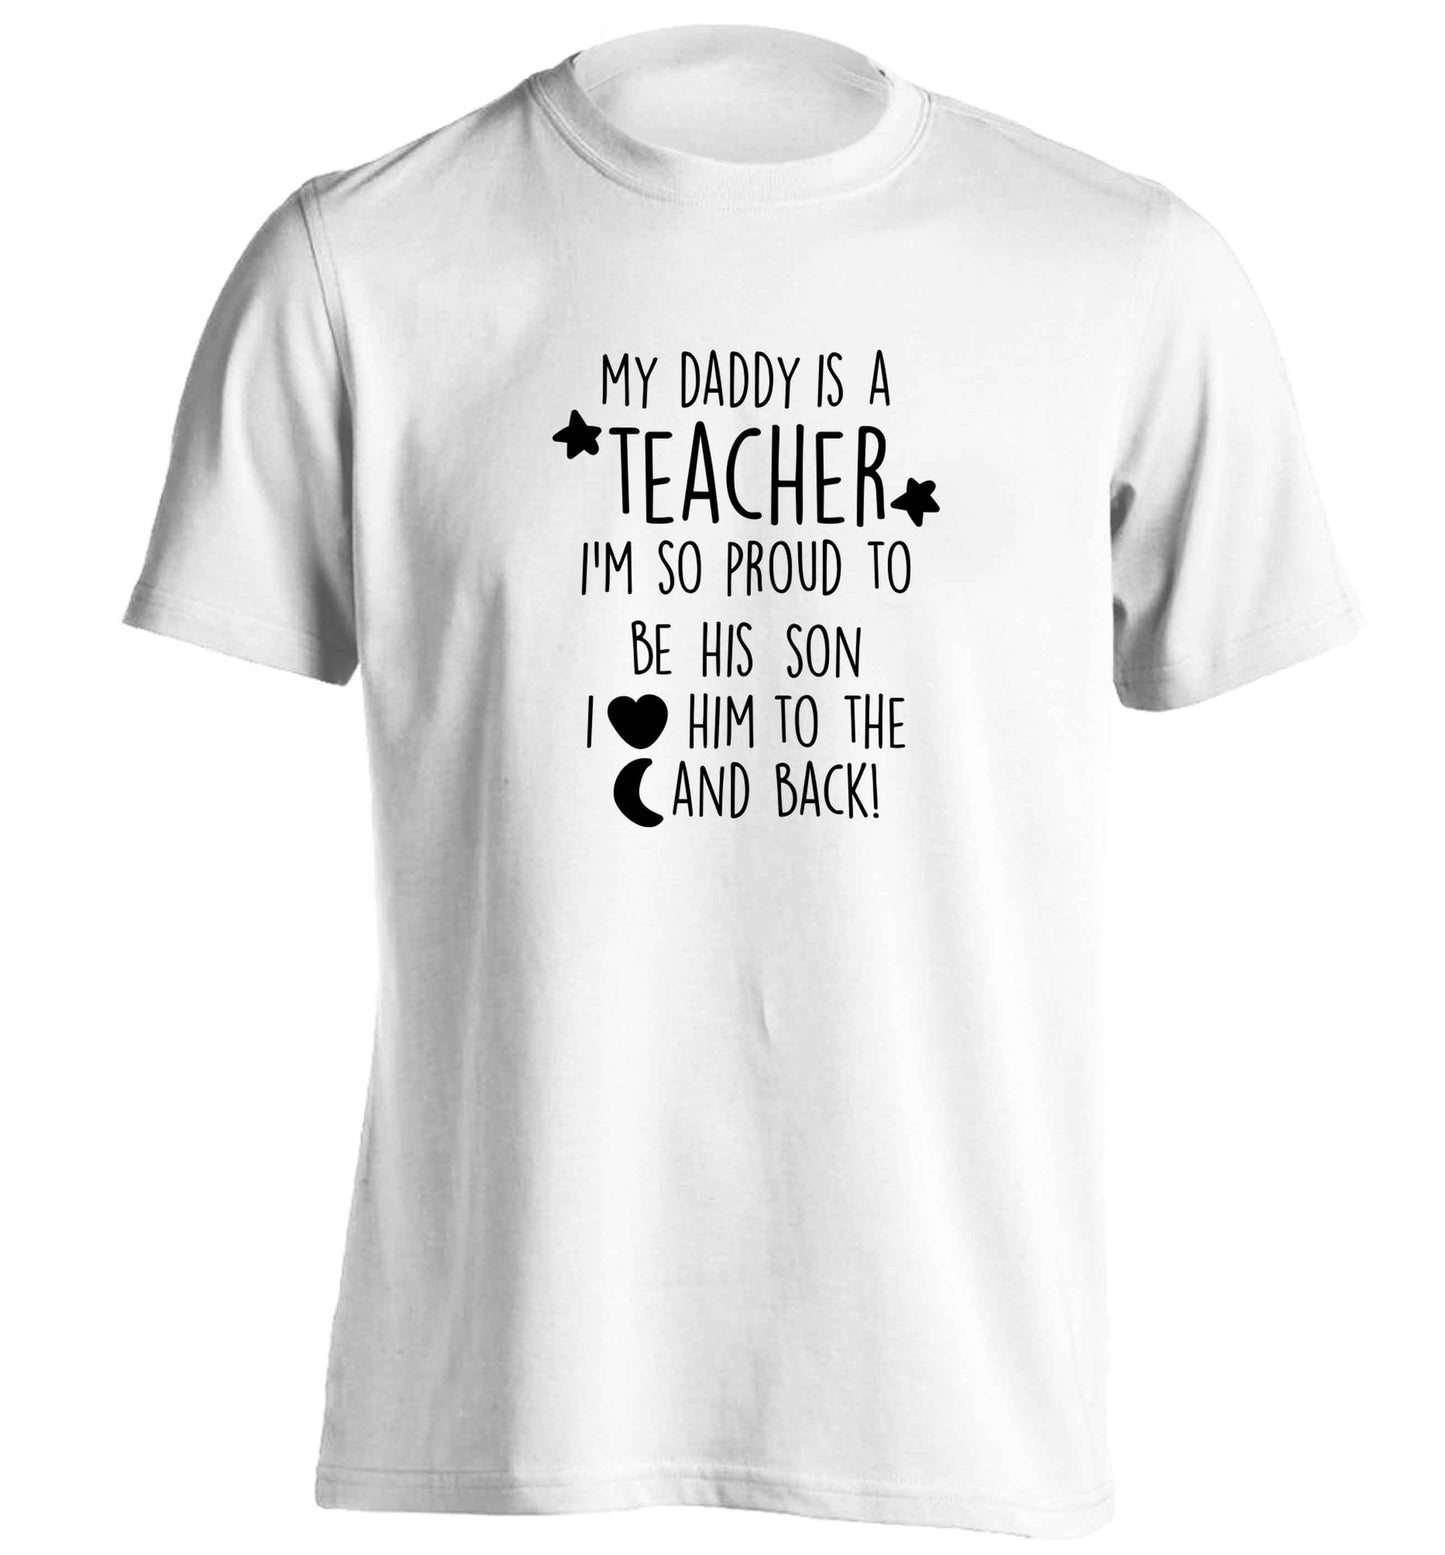 My daddy is a teacher I'm so proud to be his son I love her to the moon and back adults unisex white Tshirt 2XL